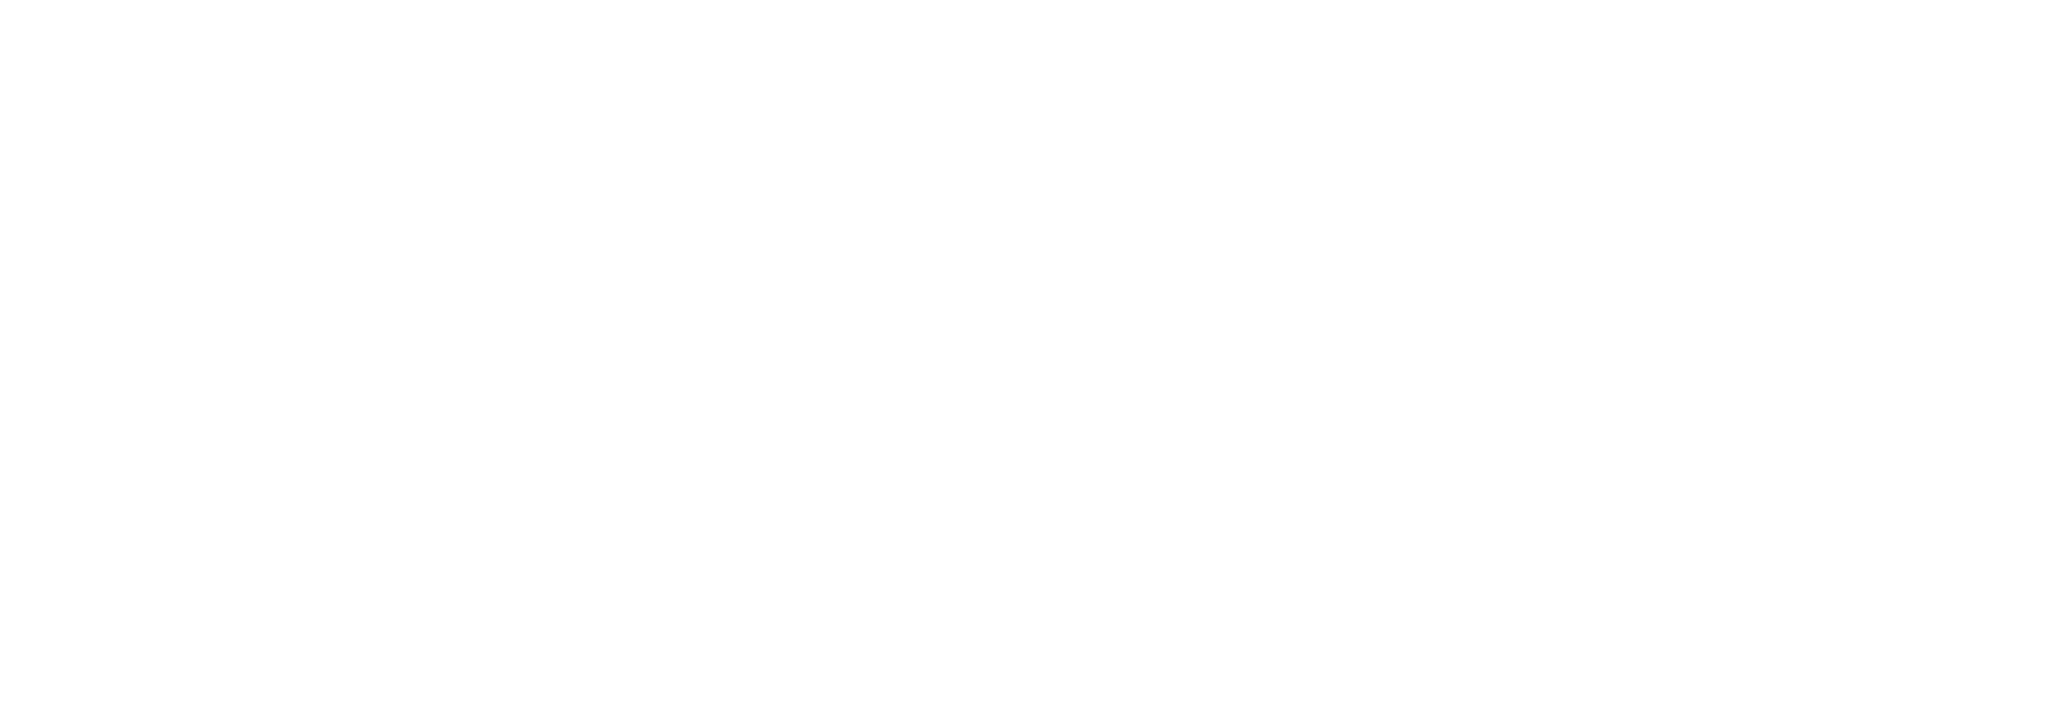 Go Green | Growth Opportunity Partners